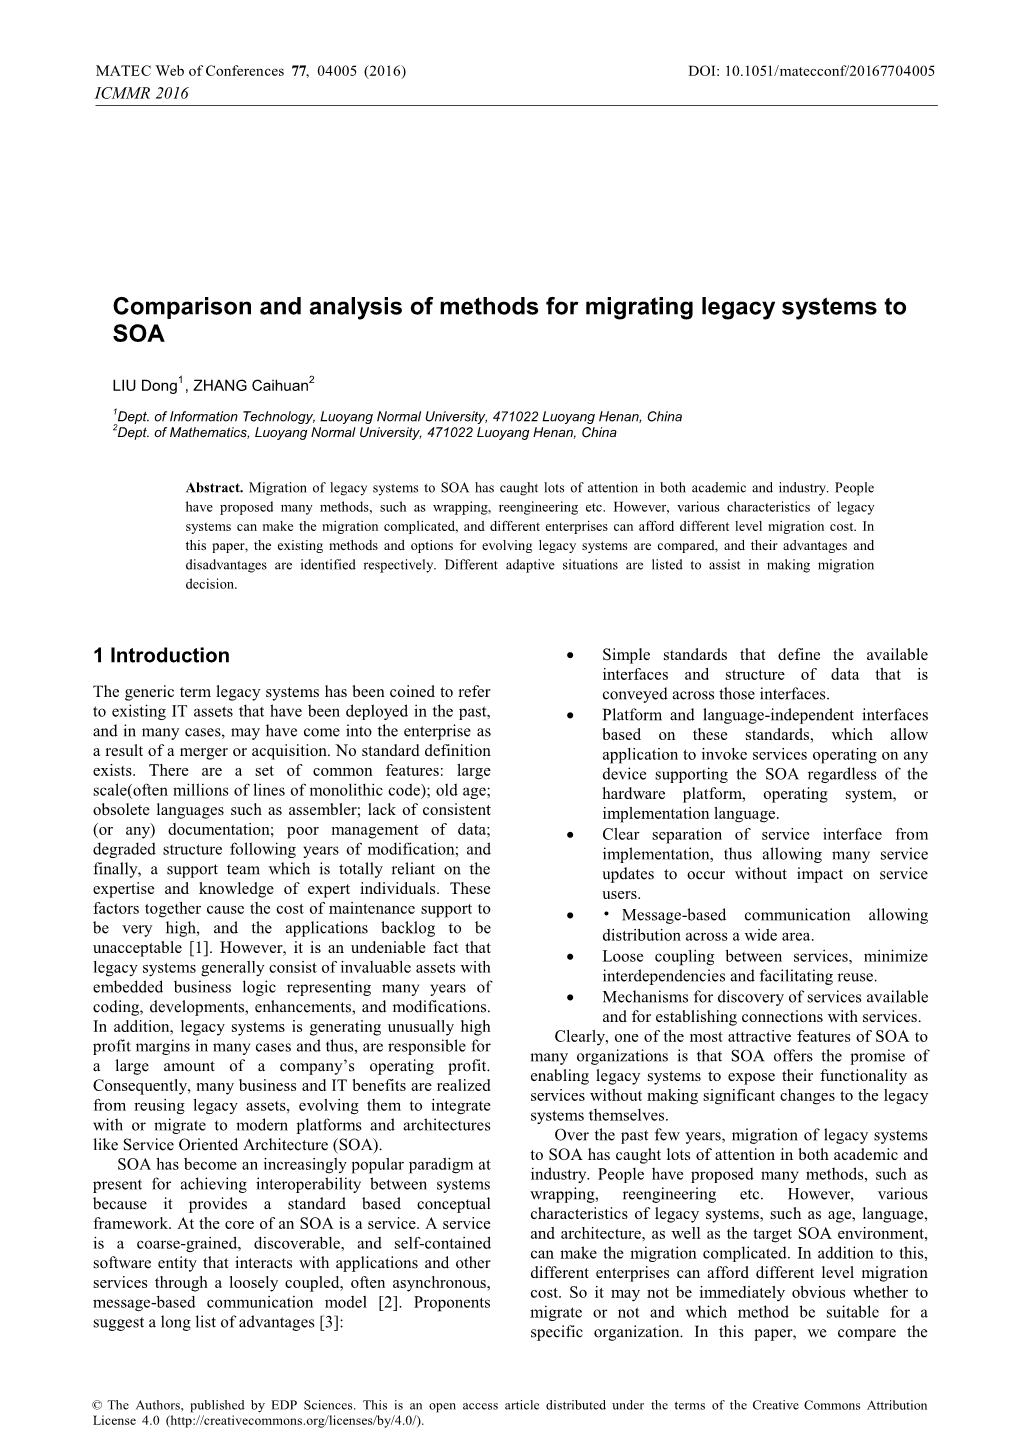 Comparison and Analysis of Methods for Migrating Legacy Systems to SOA